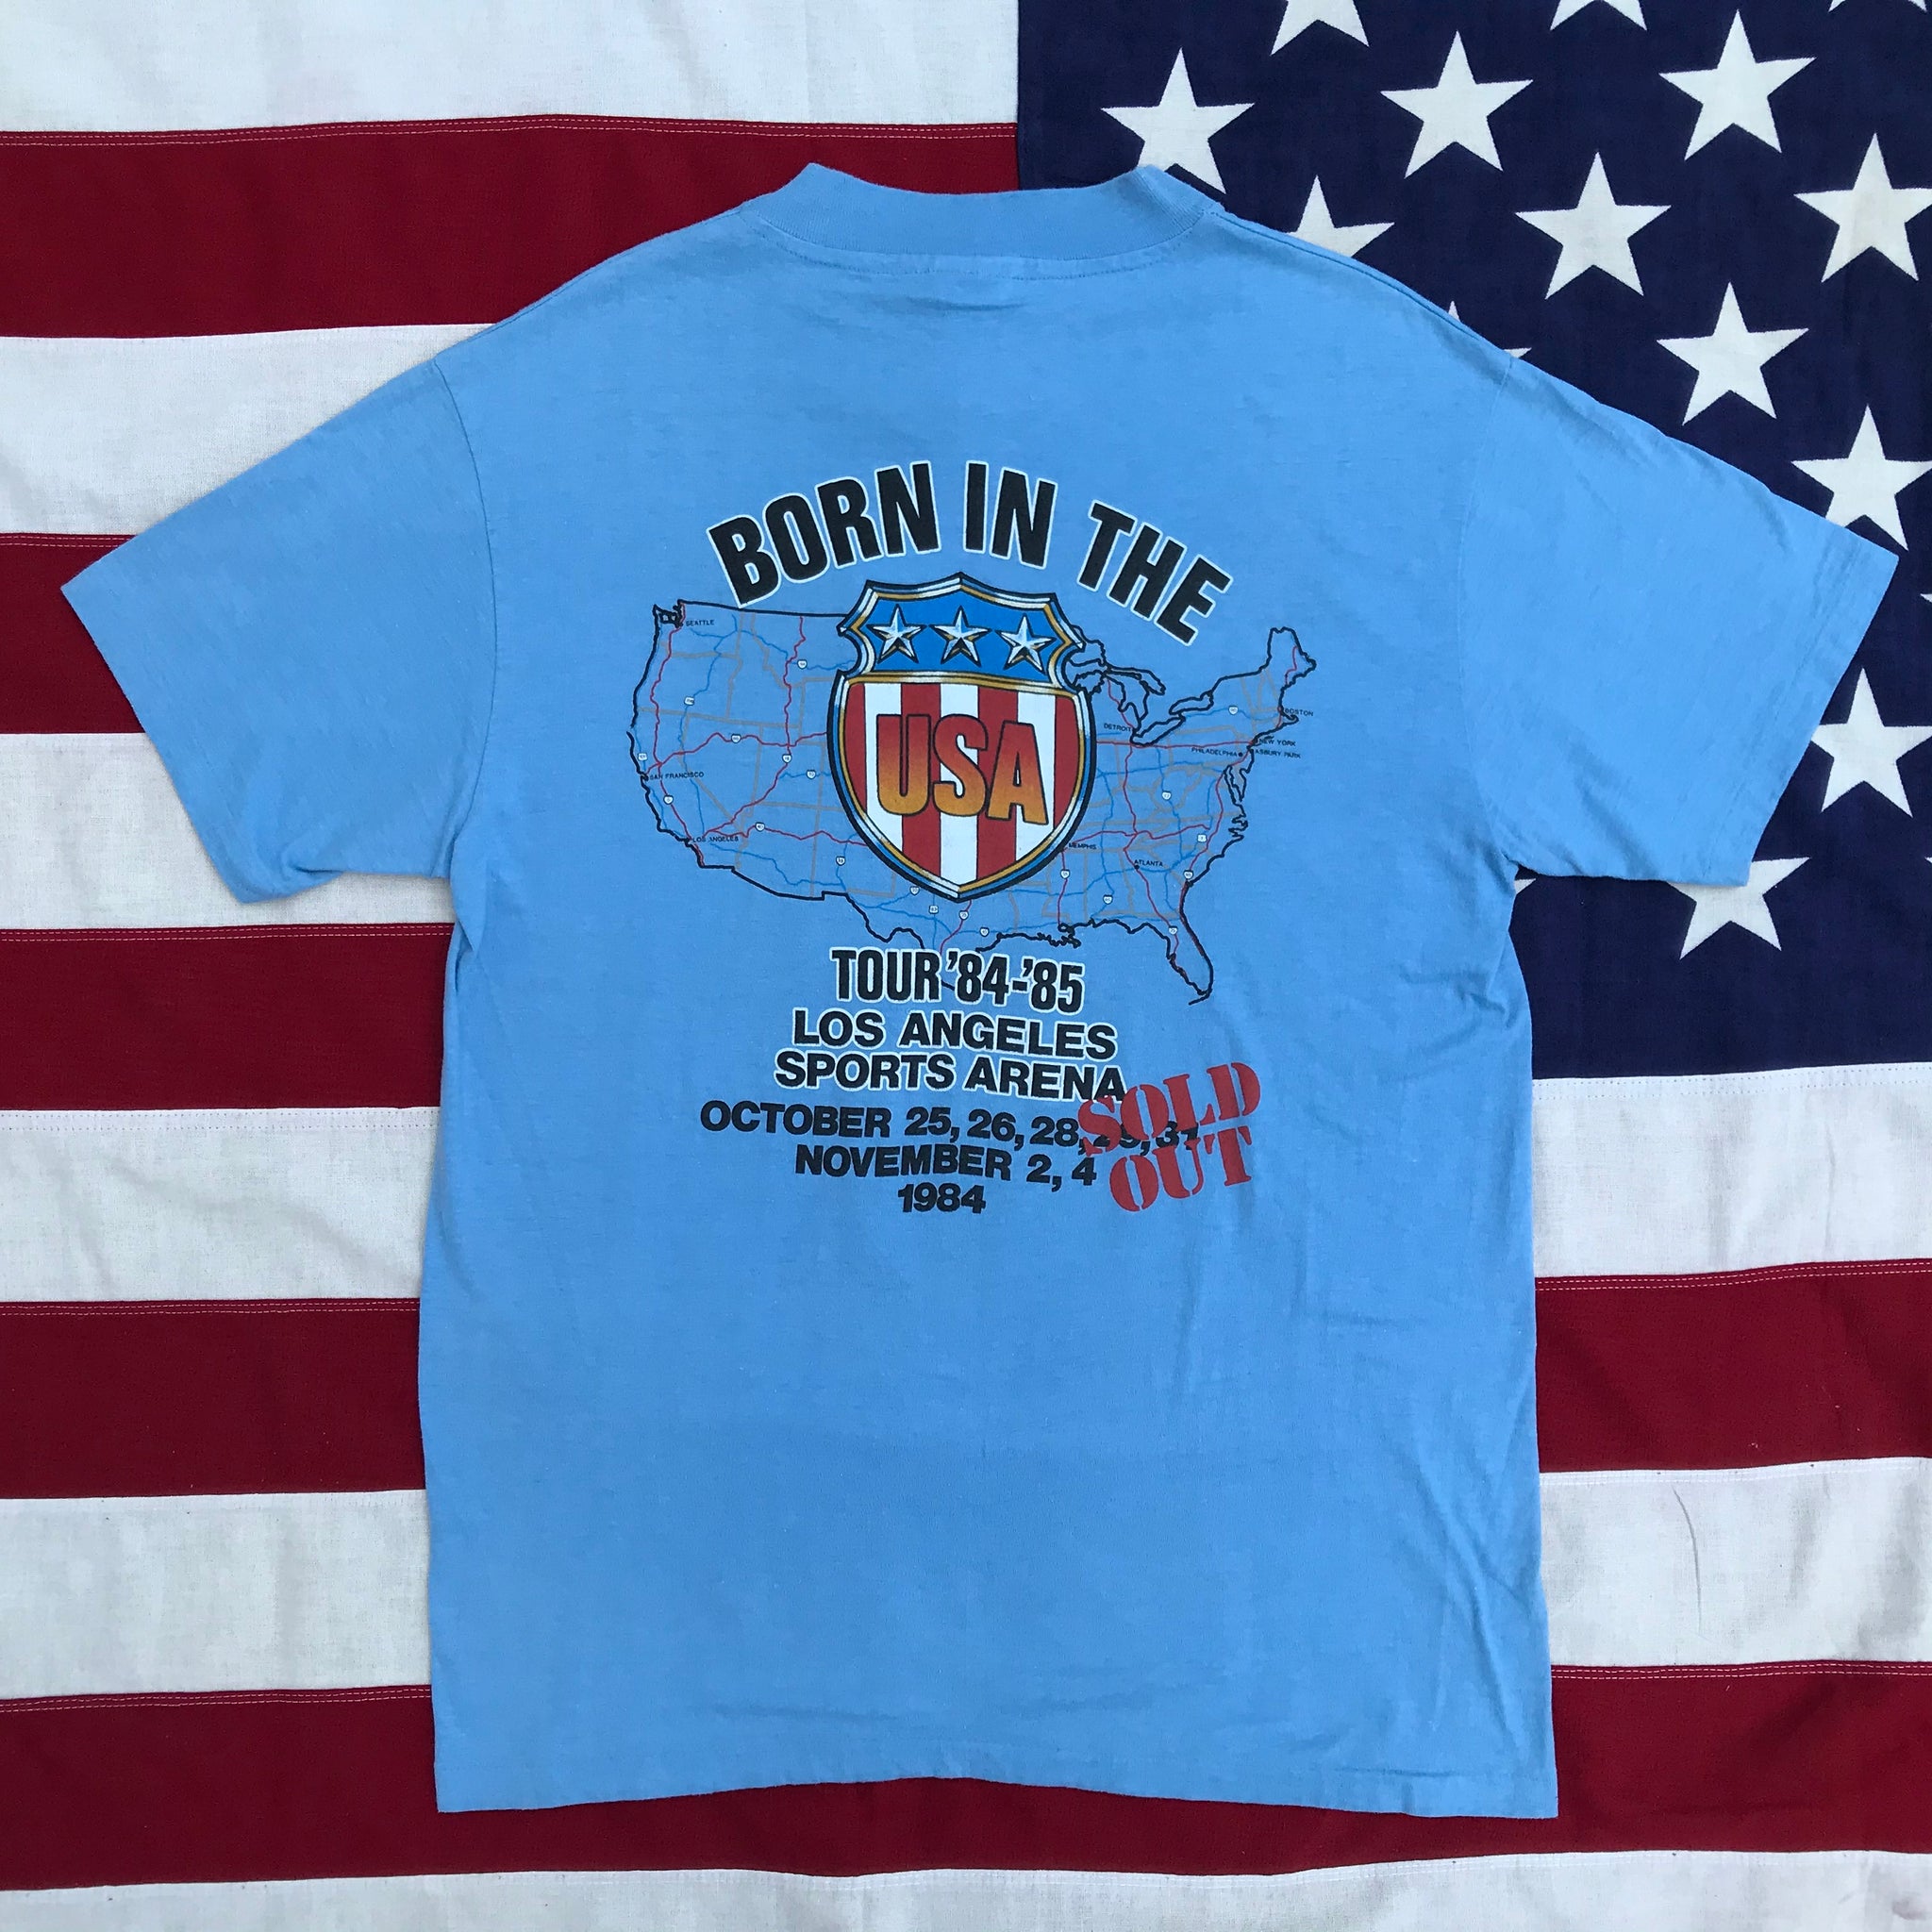 Bruce Springsteen & The E Street Band “ Born In The USA Tour ‘84-‘85 “ LA Sports Arena RARE USA Original Vintage Rock T-Shirt By Hanes USA